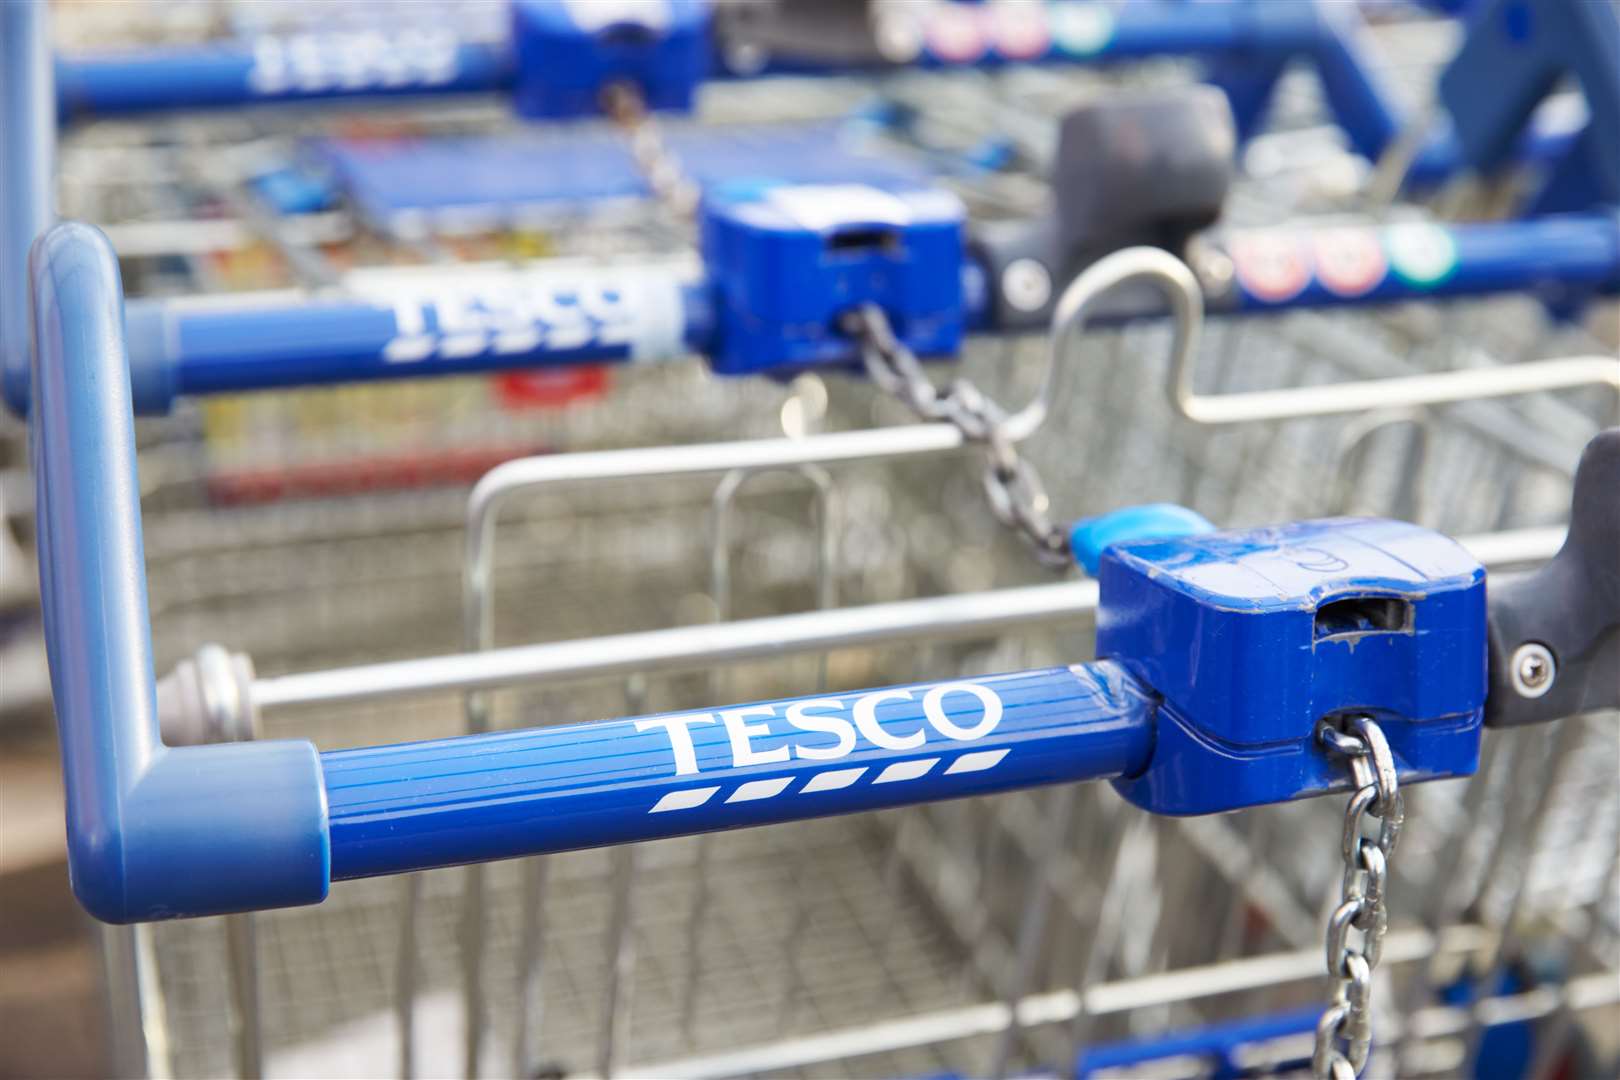 Tesco stores are opening across all four days. Image: iStock.